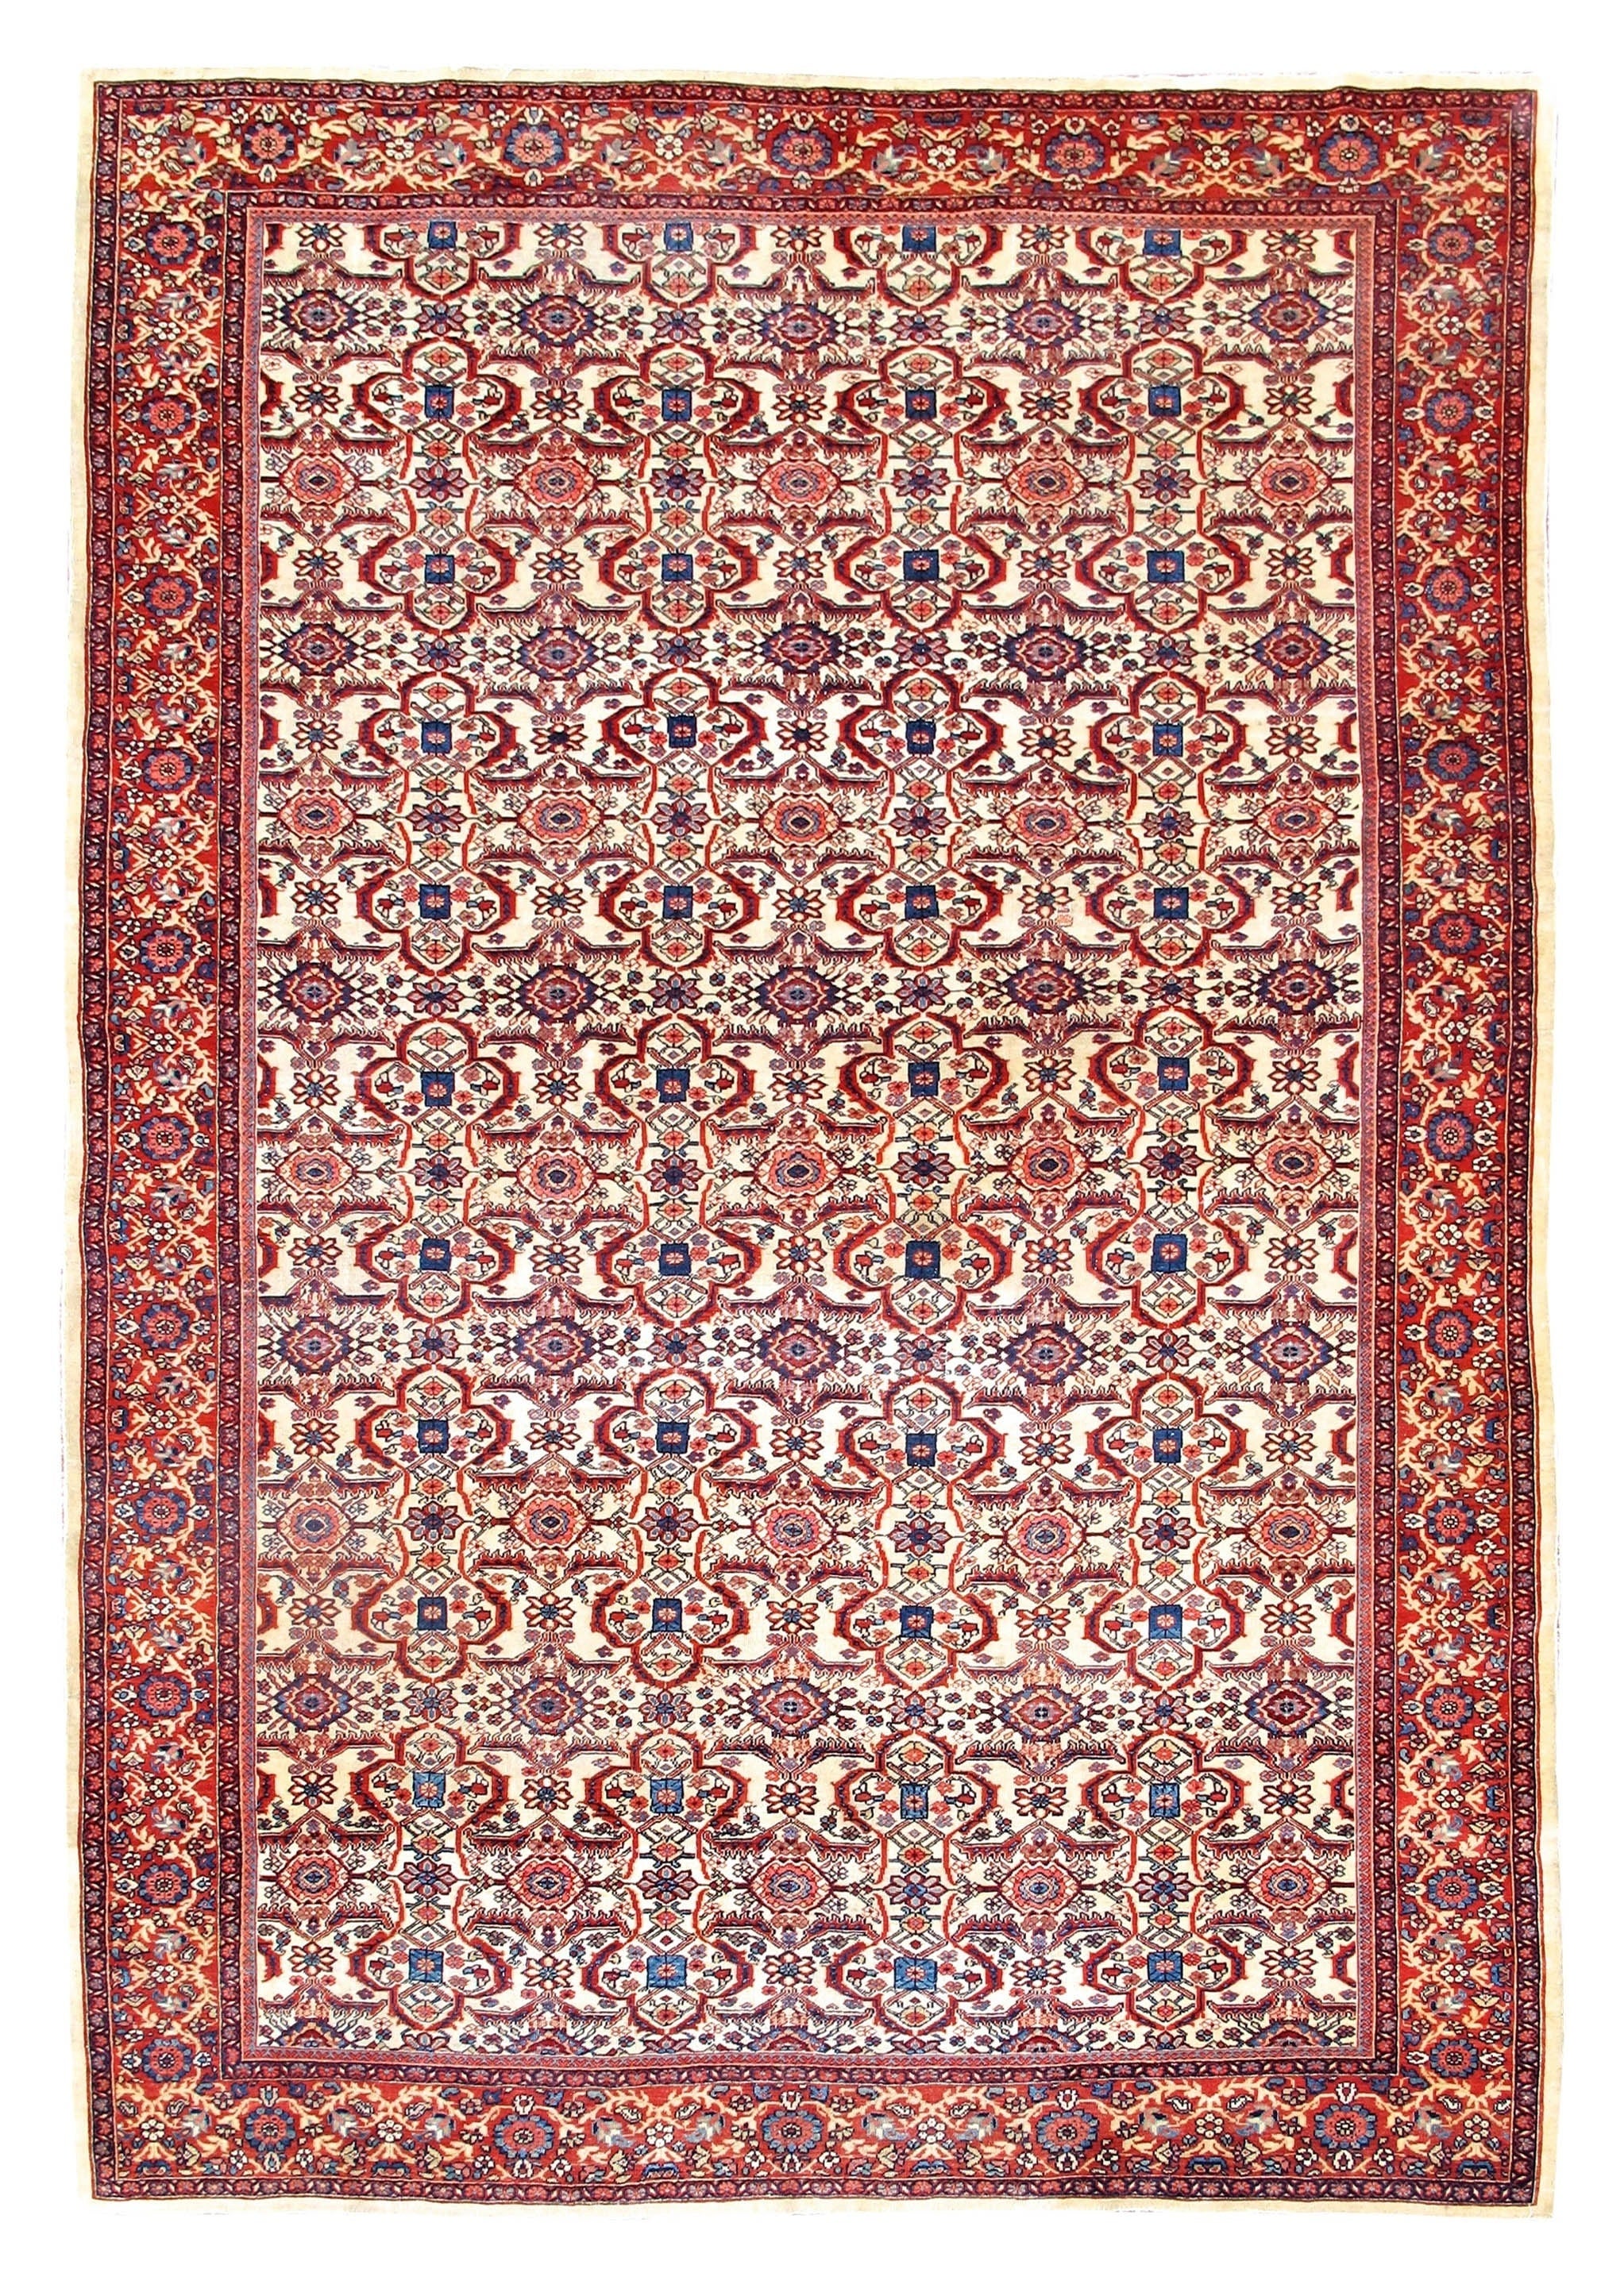 Late 19th Century Red Fereghan Sarouk Carpet with Ivory Field